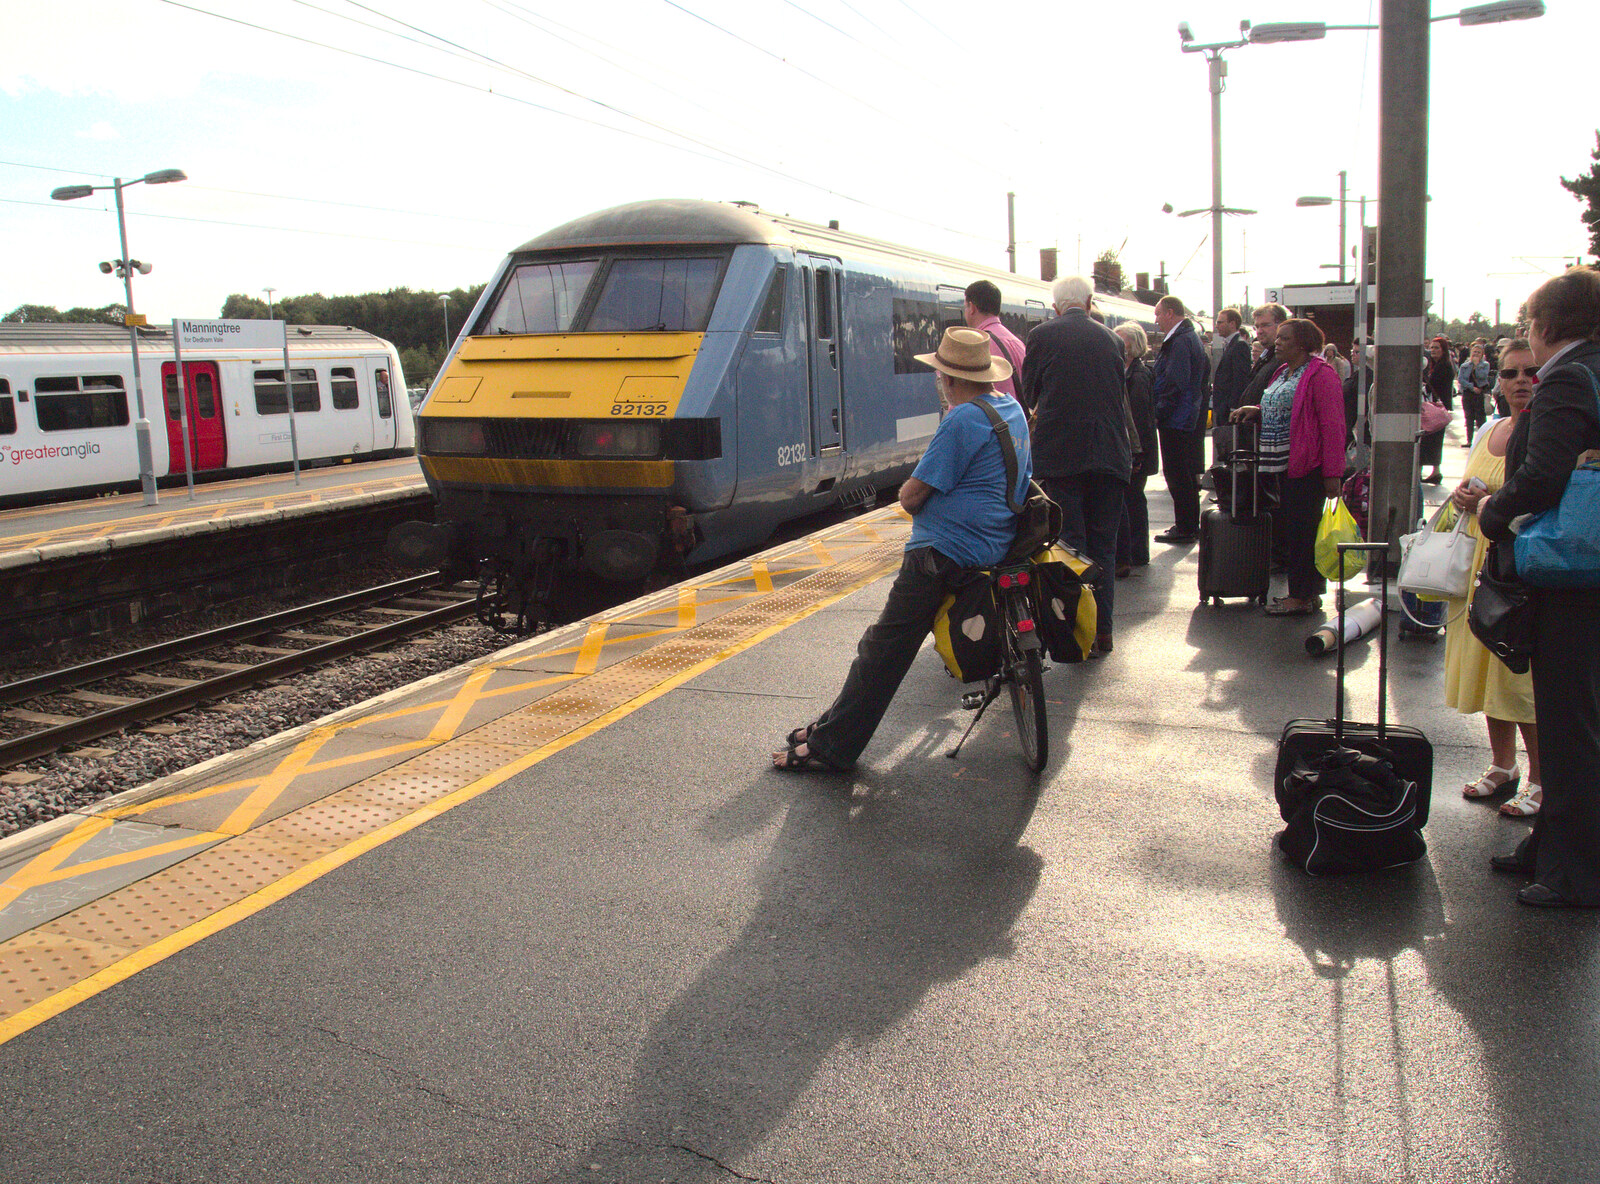 Another cyclist waits for something to happen from Train Fails, and Pizza Pub, Manningtree and Southwark - 12th August 2014